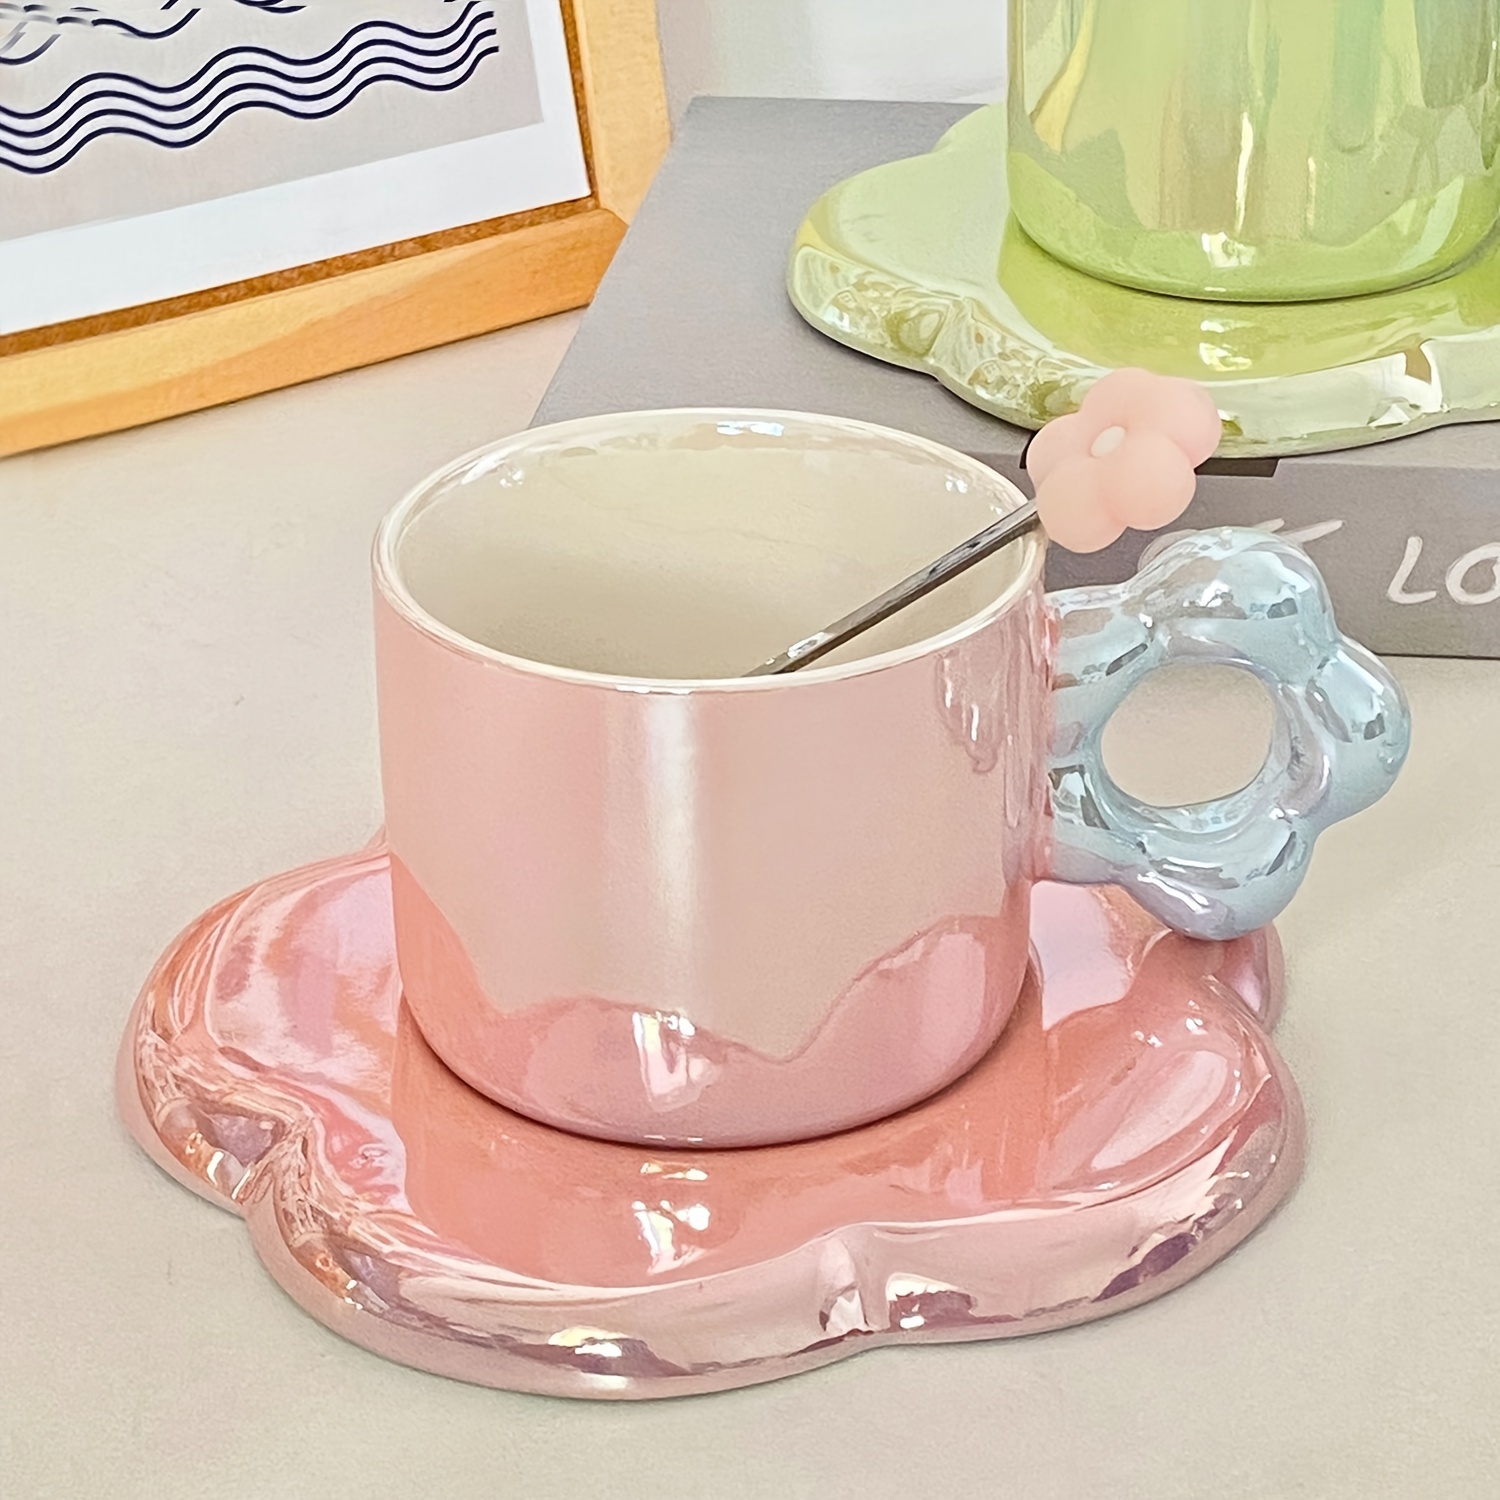 Creative Cute Ceramic Coffee Cup and Saucer Set, Gift Pink